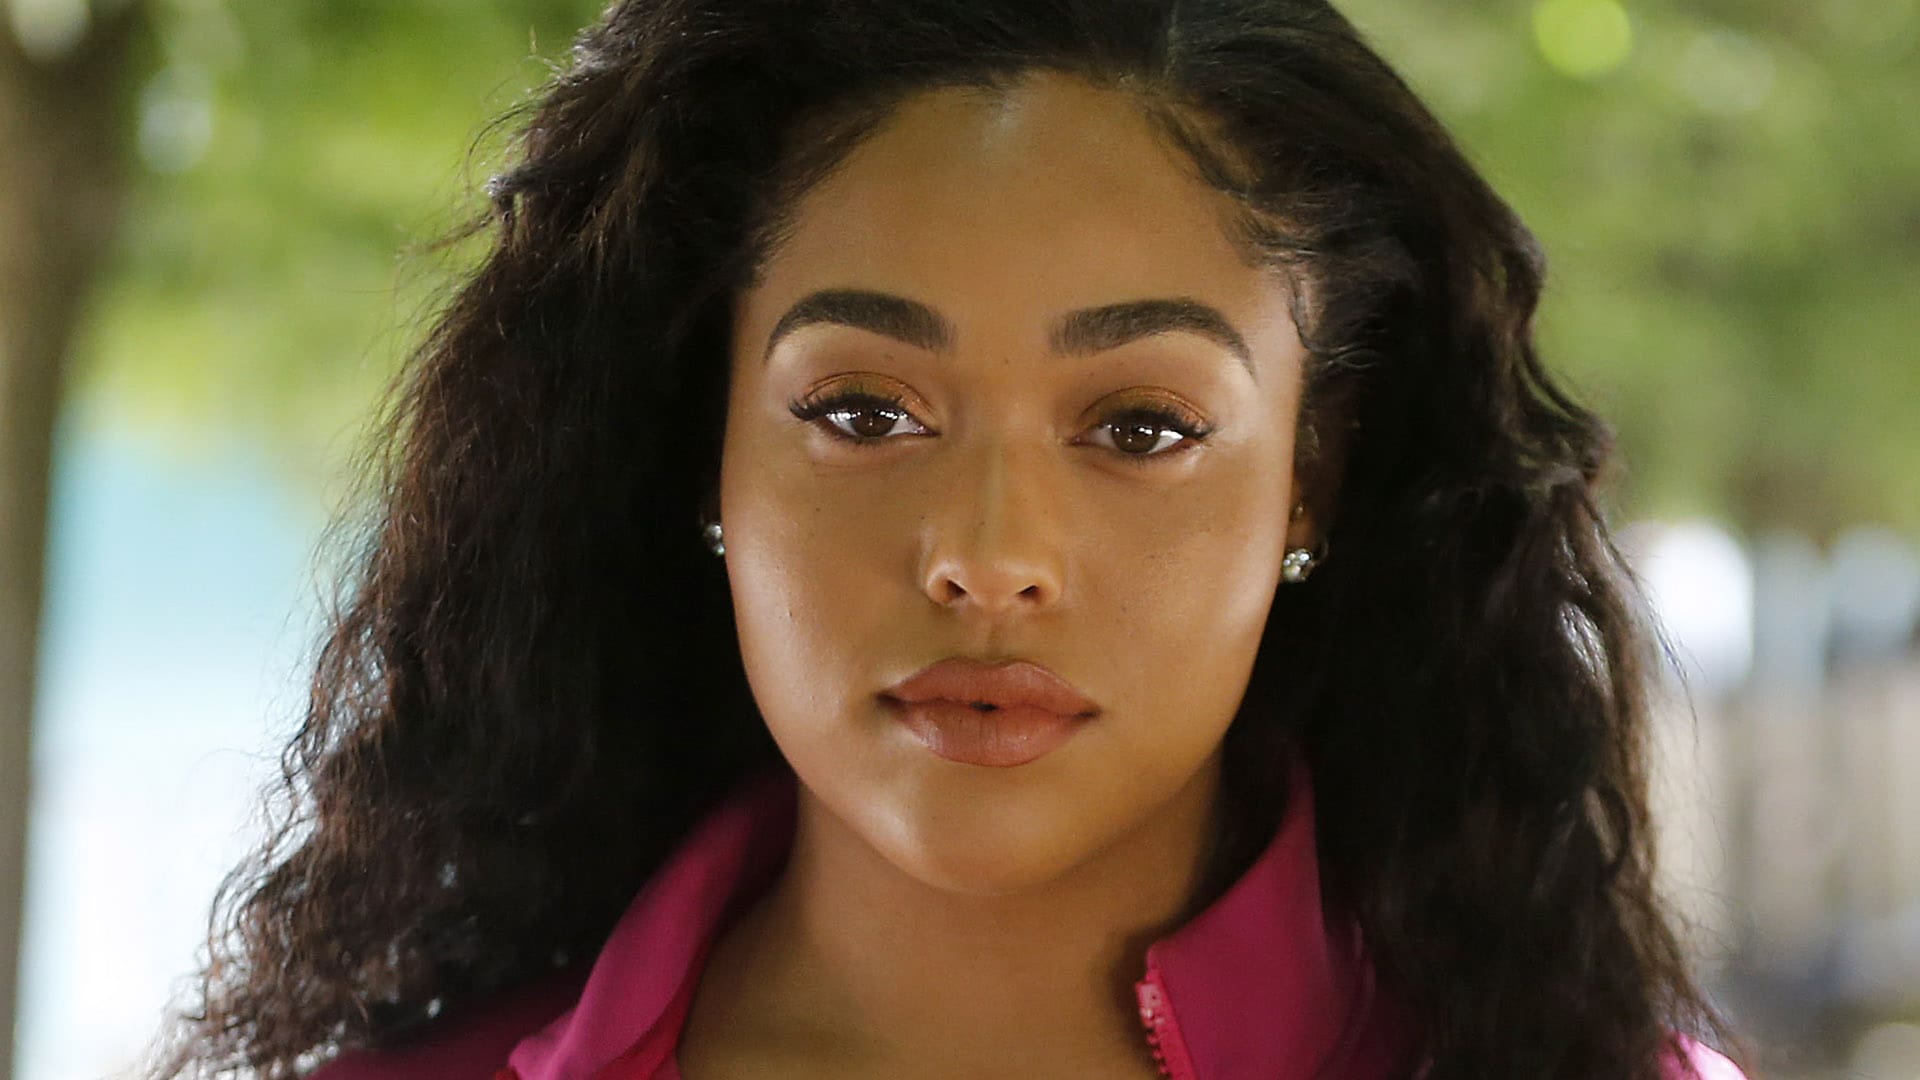 Jordyn Woods Shares A New Look And Mesmerizes People - See The Clip